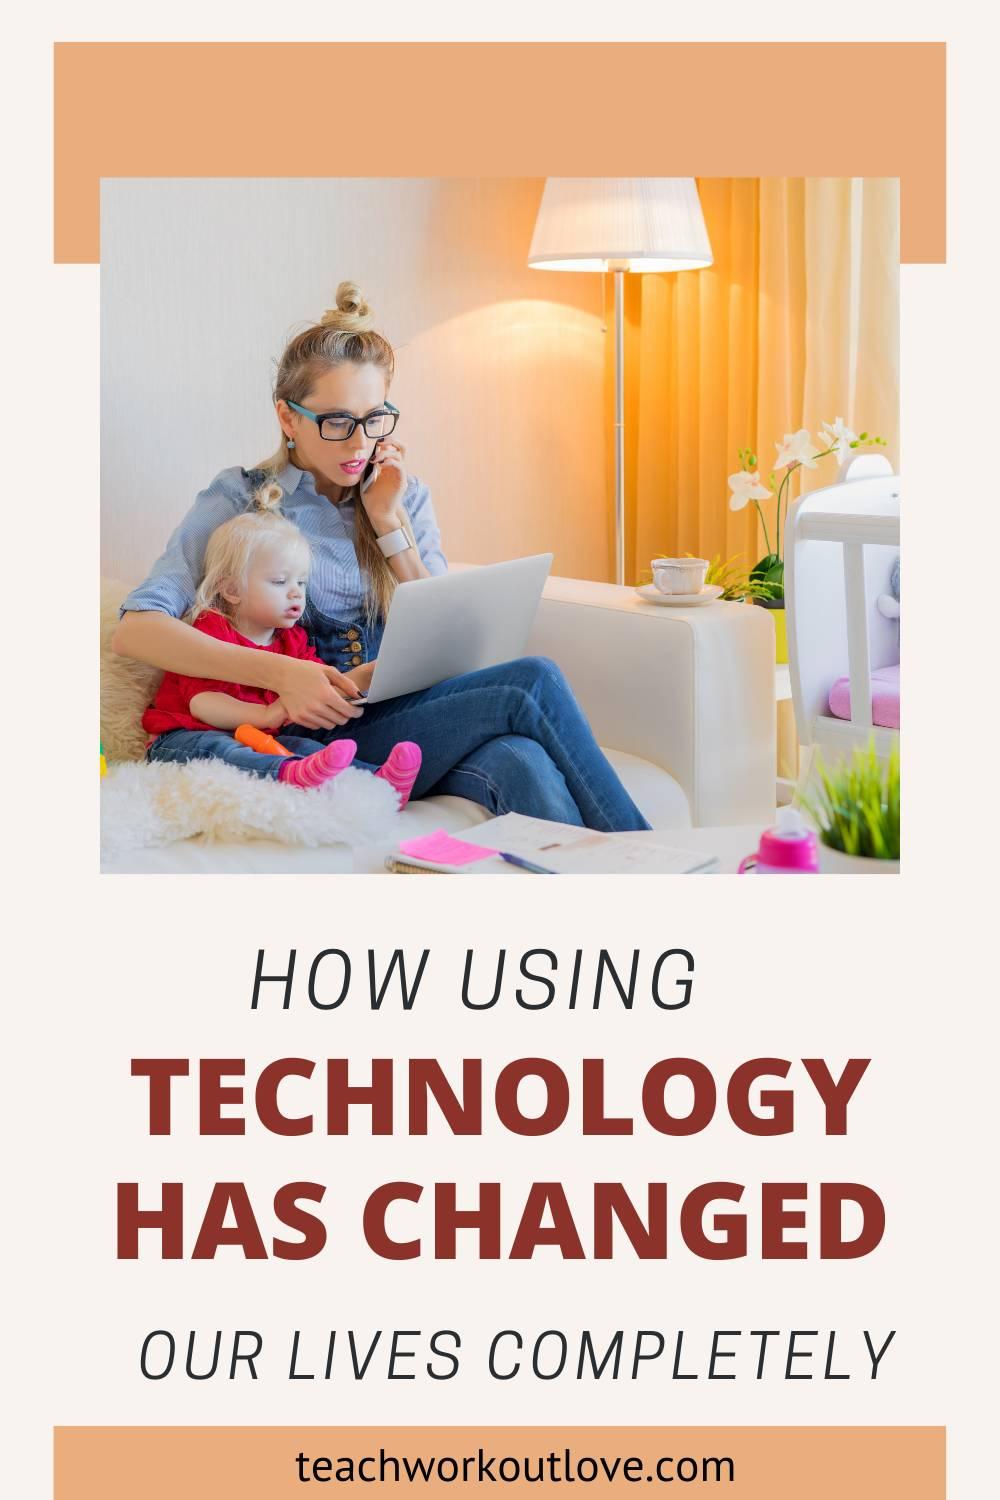 Technology takes center stage in this modern world. Here are some of the ways that technology transformed our lives for the better.